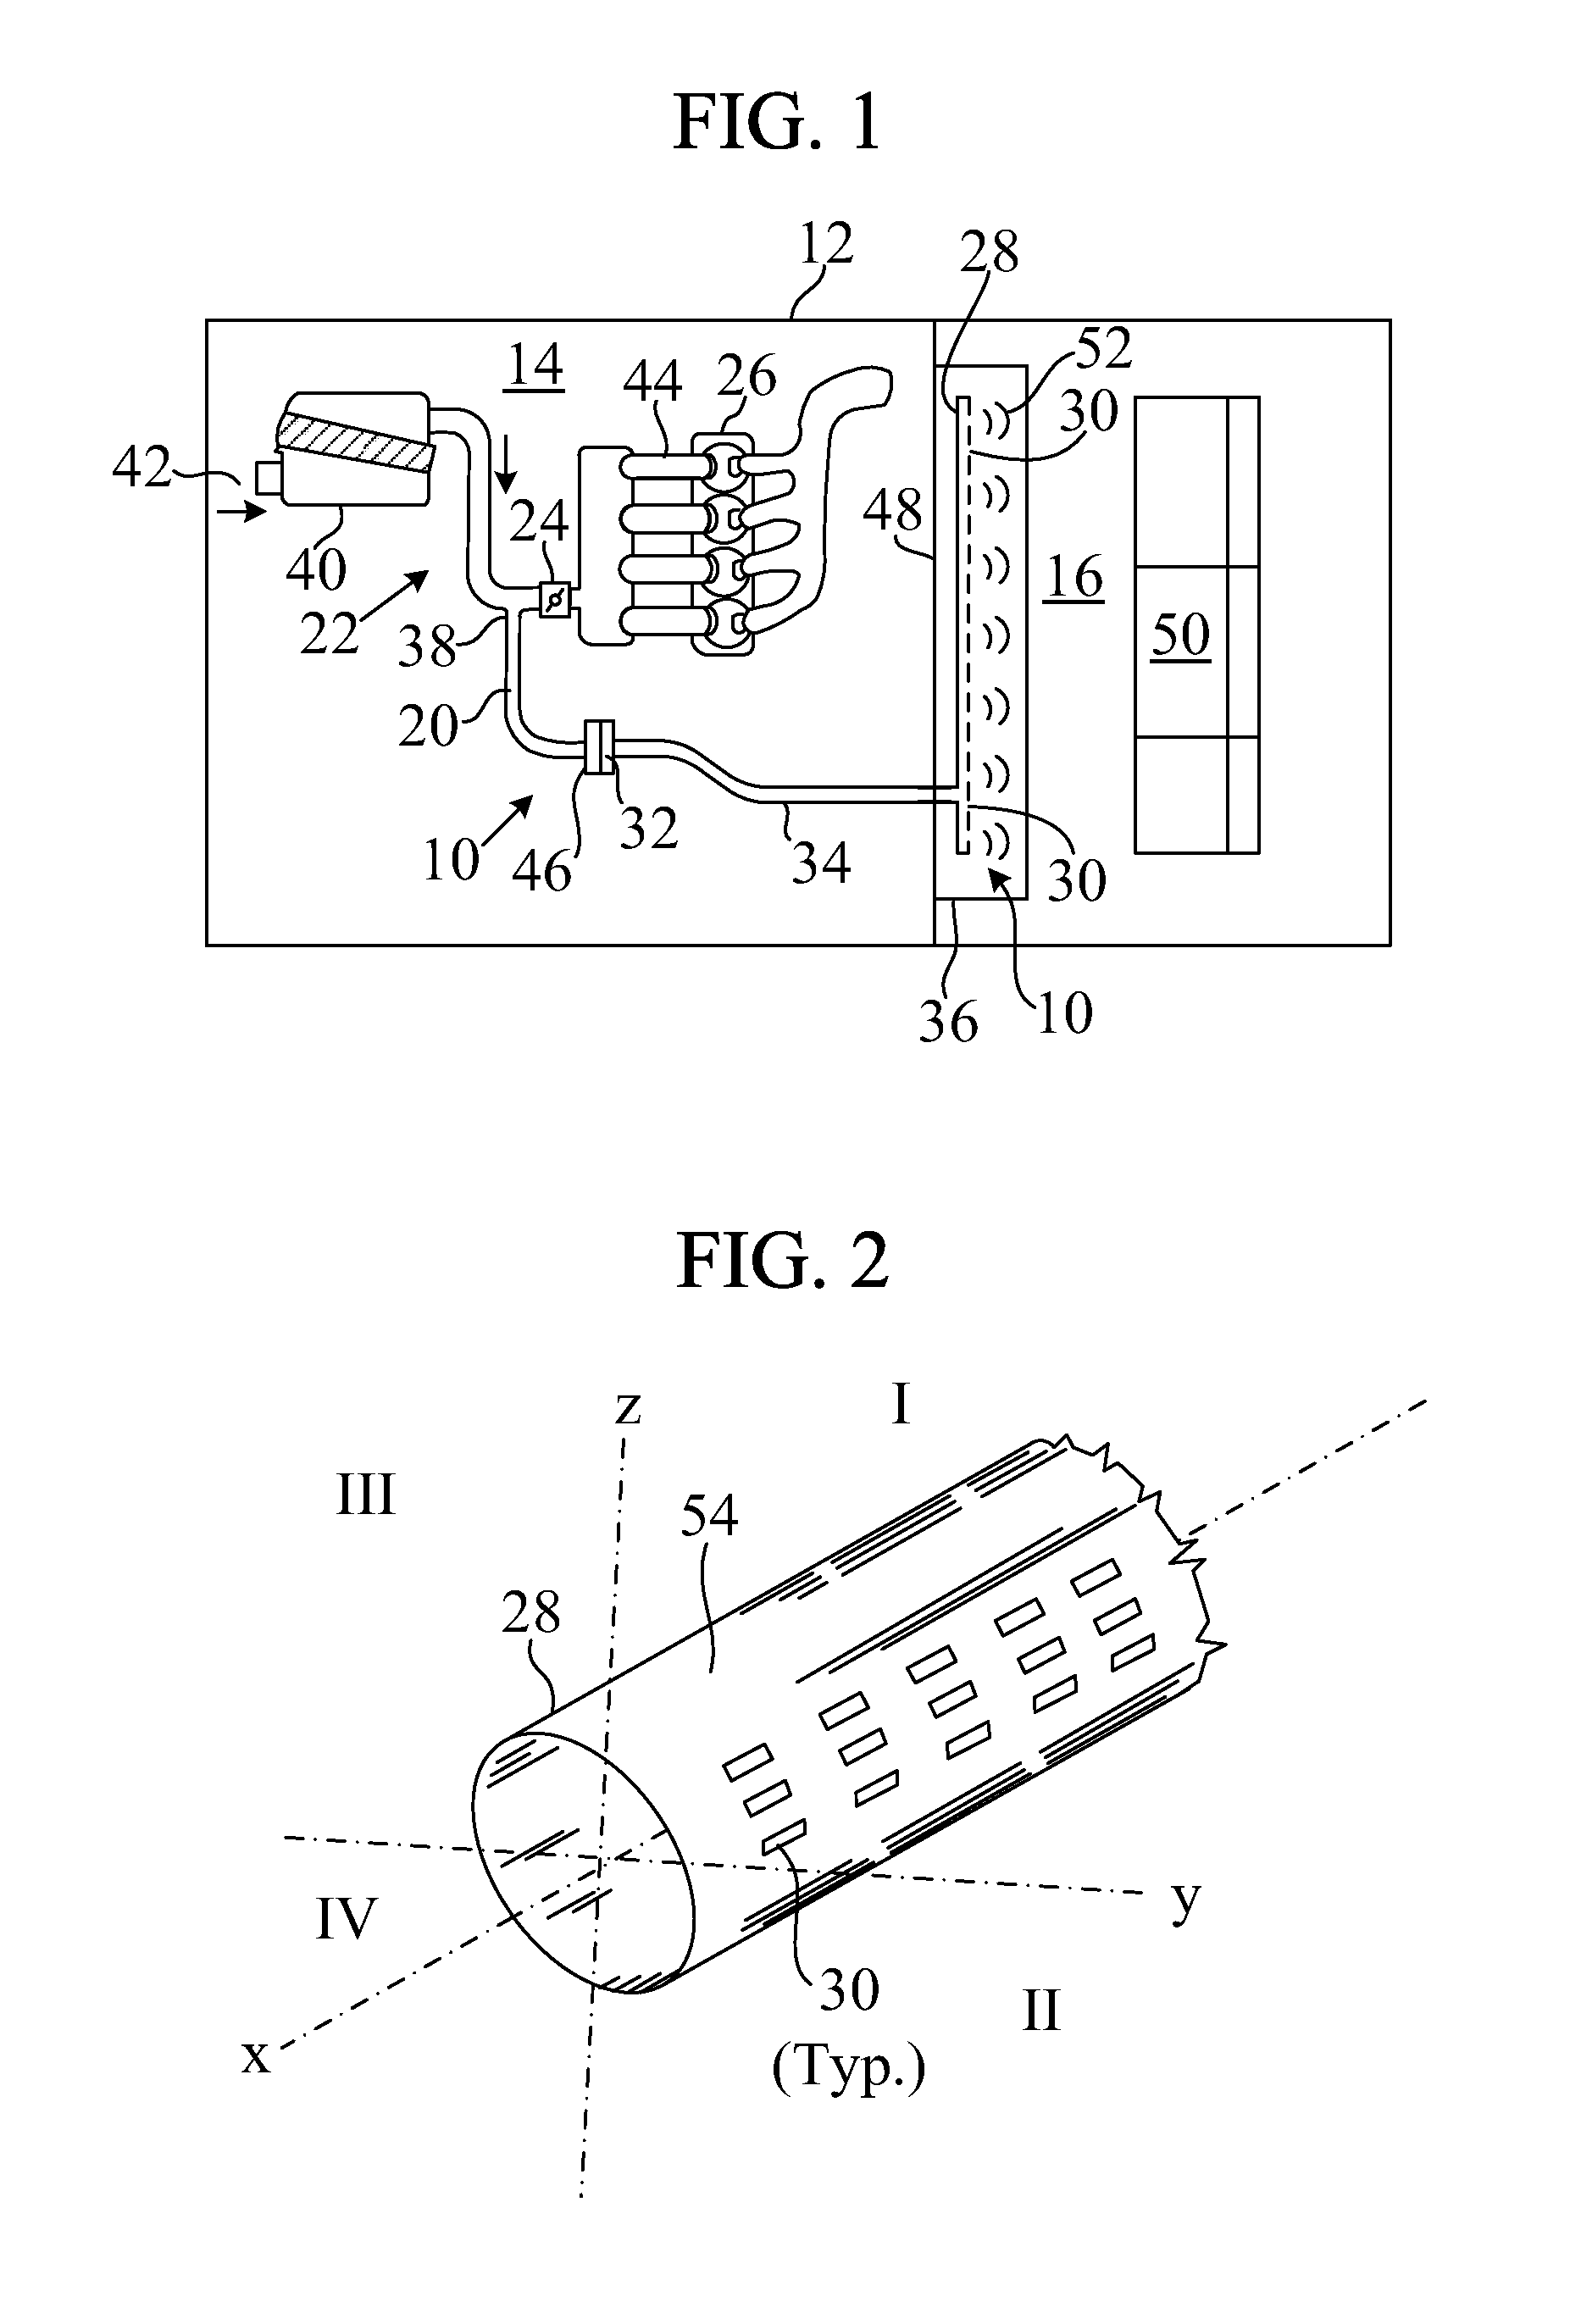 Engine sound distribution apparatus for a motor vehicle